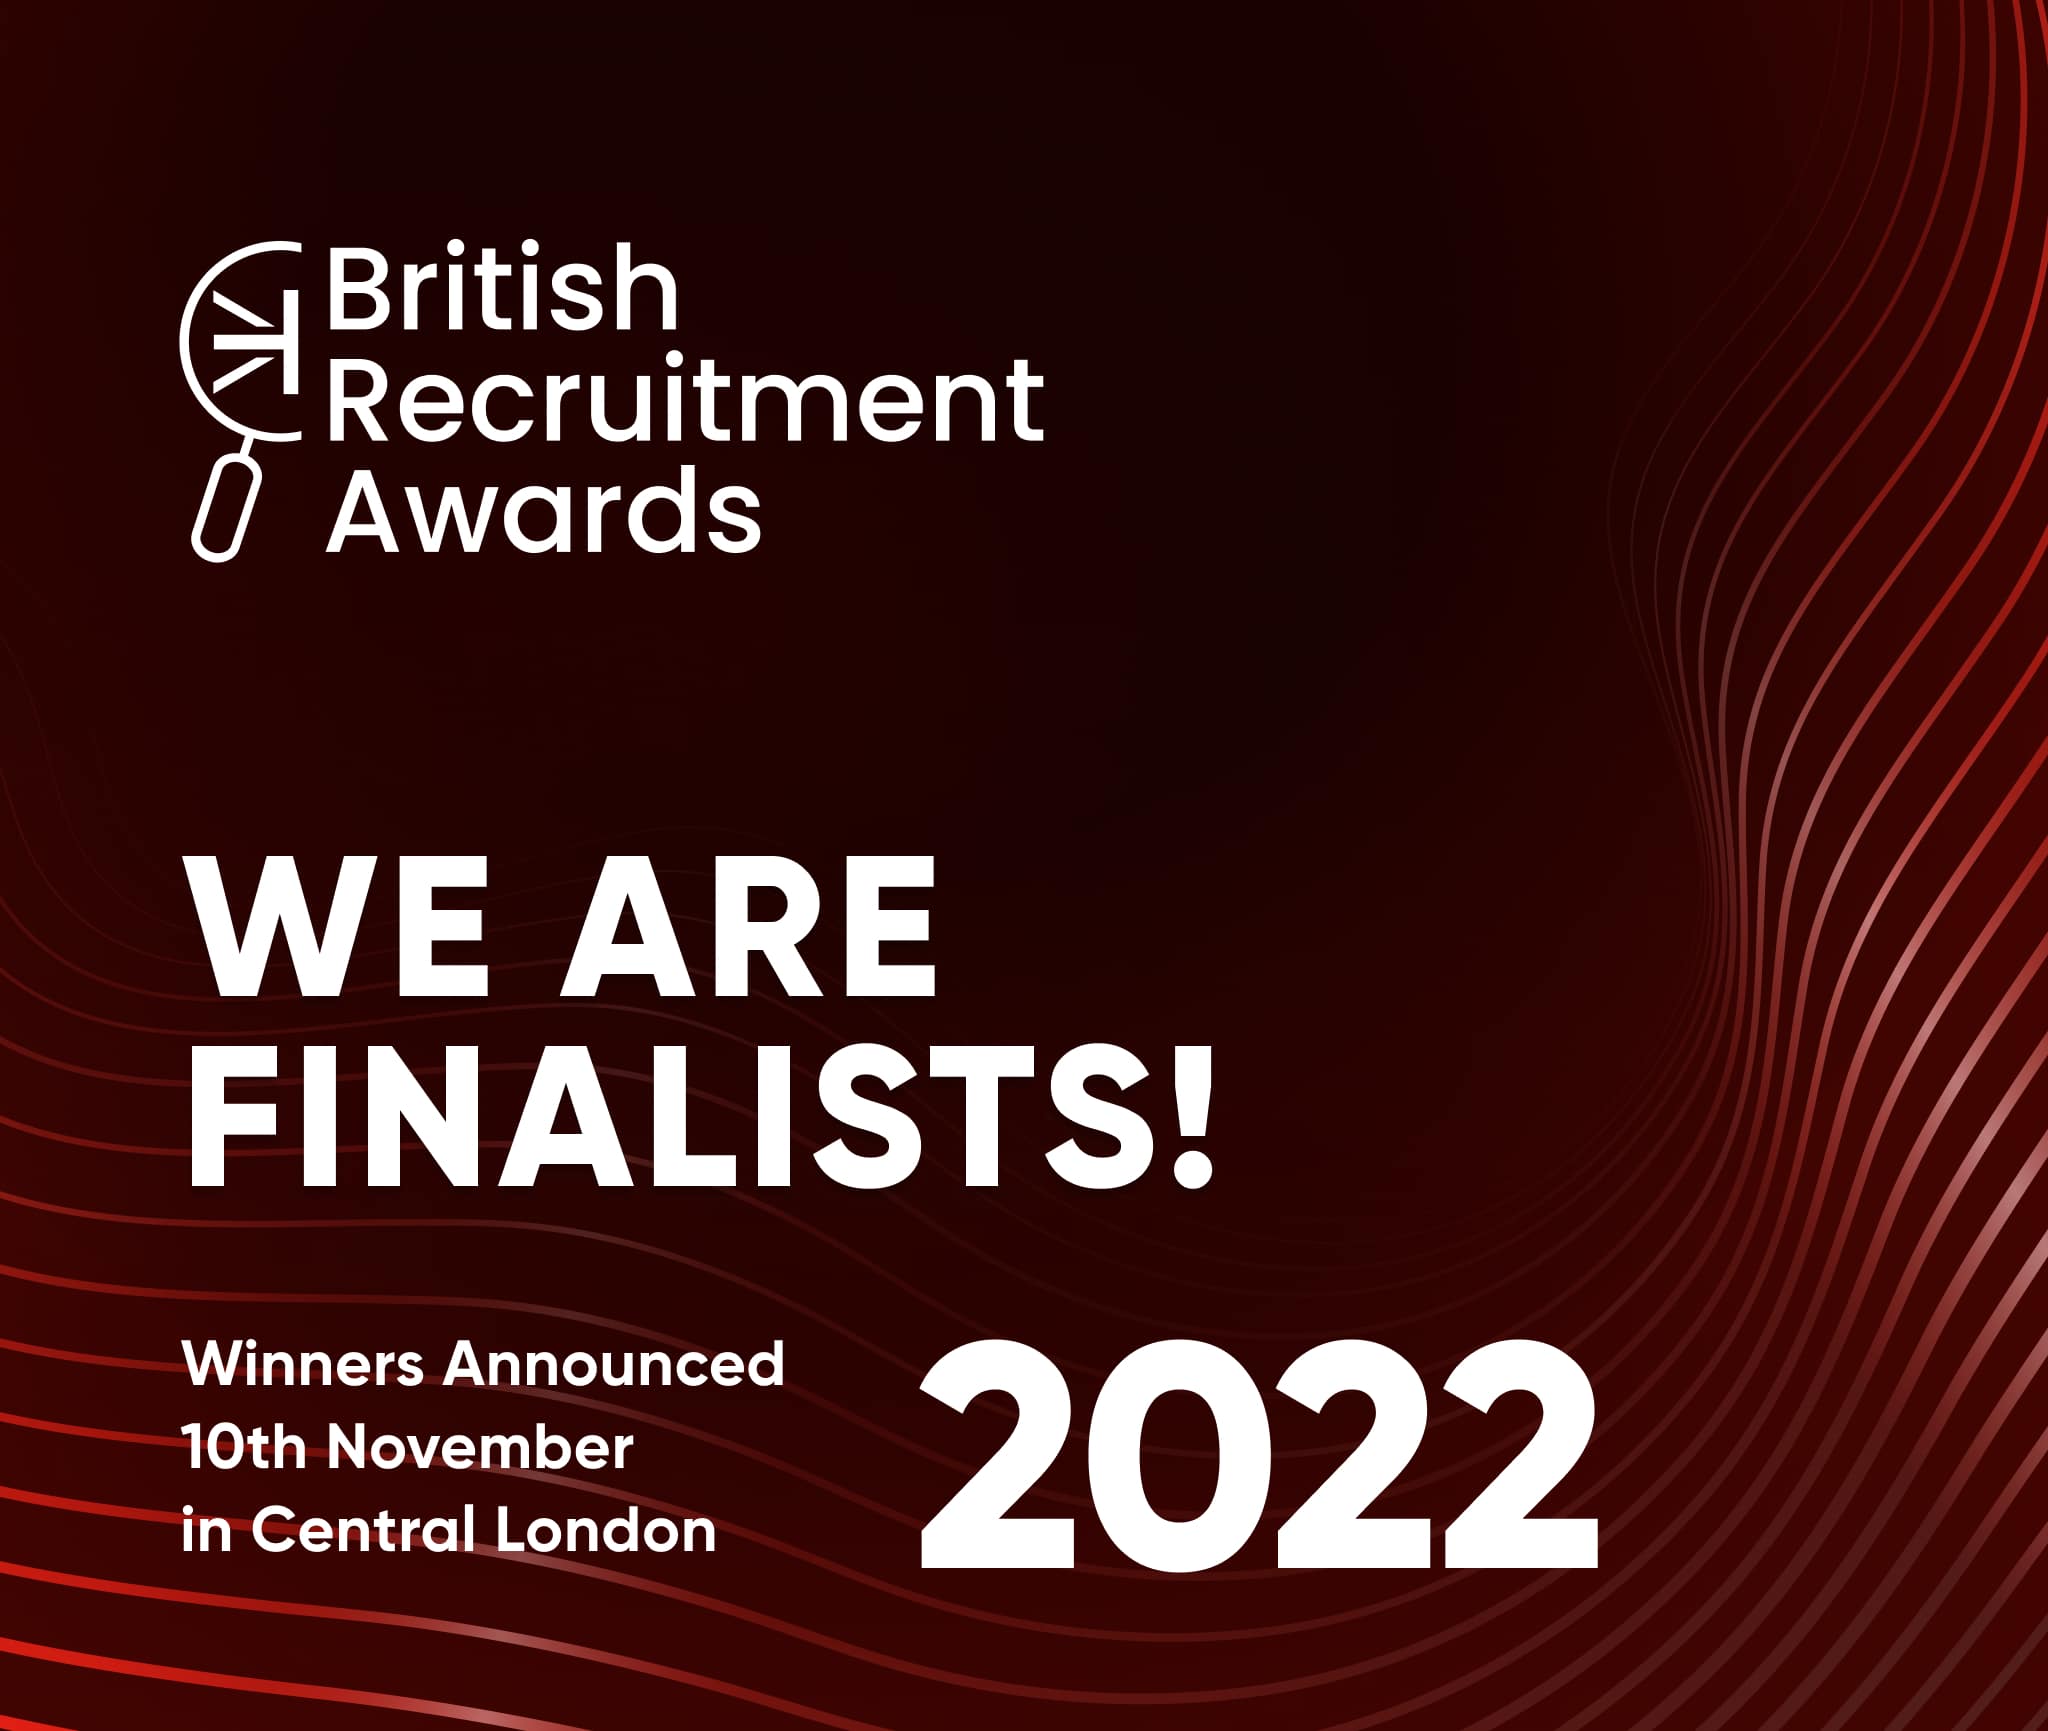 GrowMore Recruitment is a Finalist in the British Recruitment Awards 2022